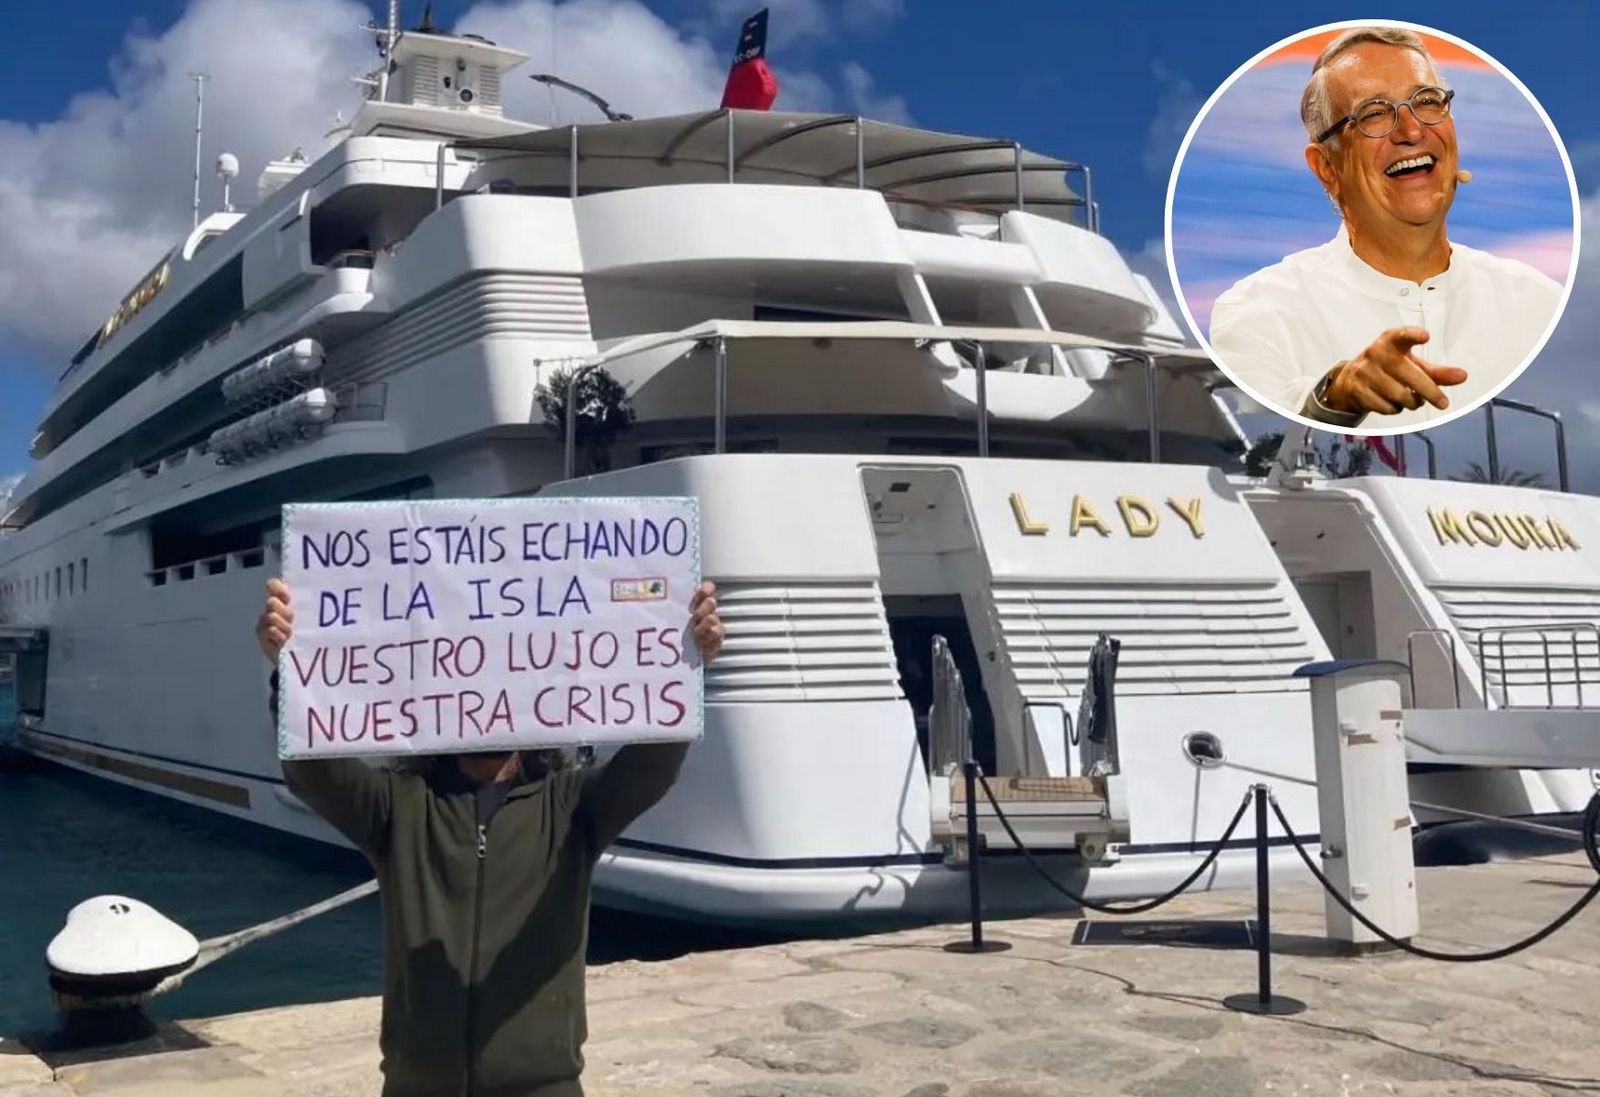 The eco-activists that vandalized Walmart Heiress Nancy Walton’s $300 million superyacht also targeted flamboyant Mexican billionaire Ricardo Salinas’s $250 million superyacht in Ibiza. As luxurious as they come, Lady Moura has 13 cabins, a bakery, a danc